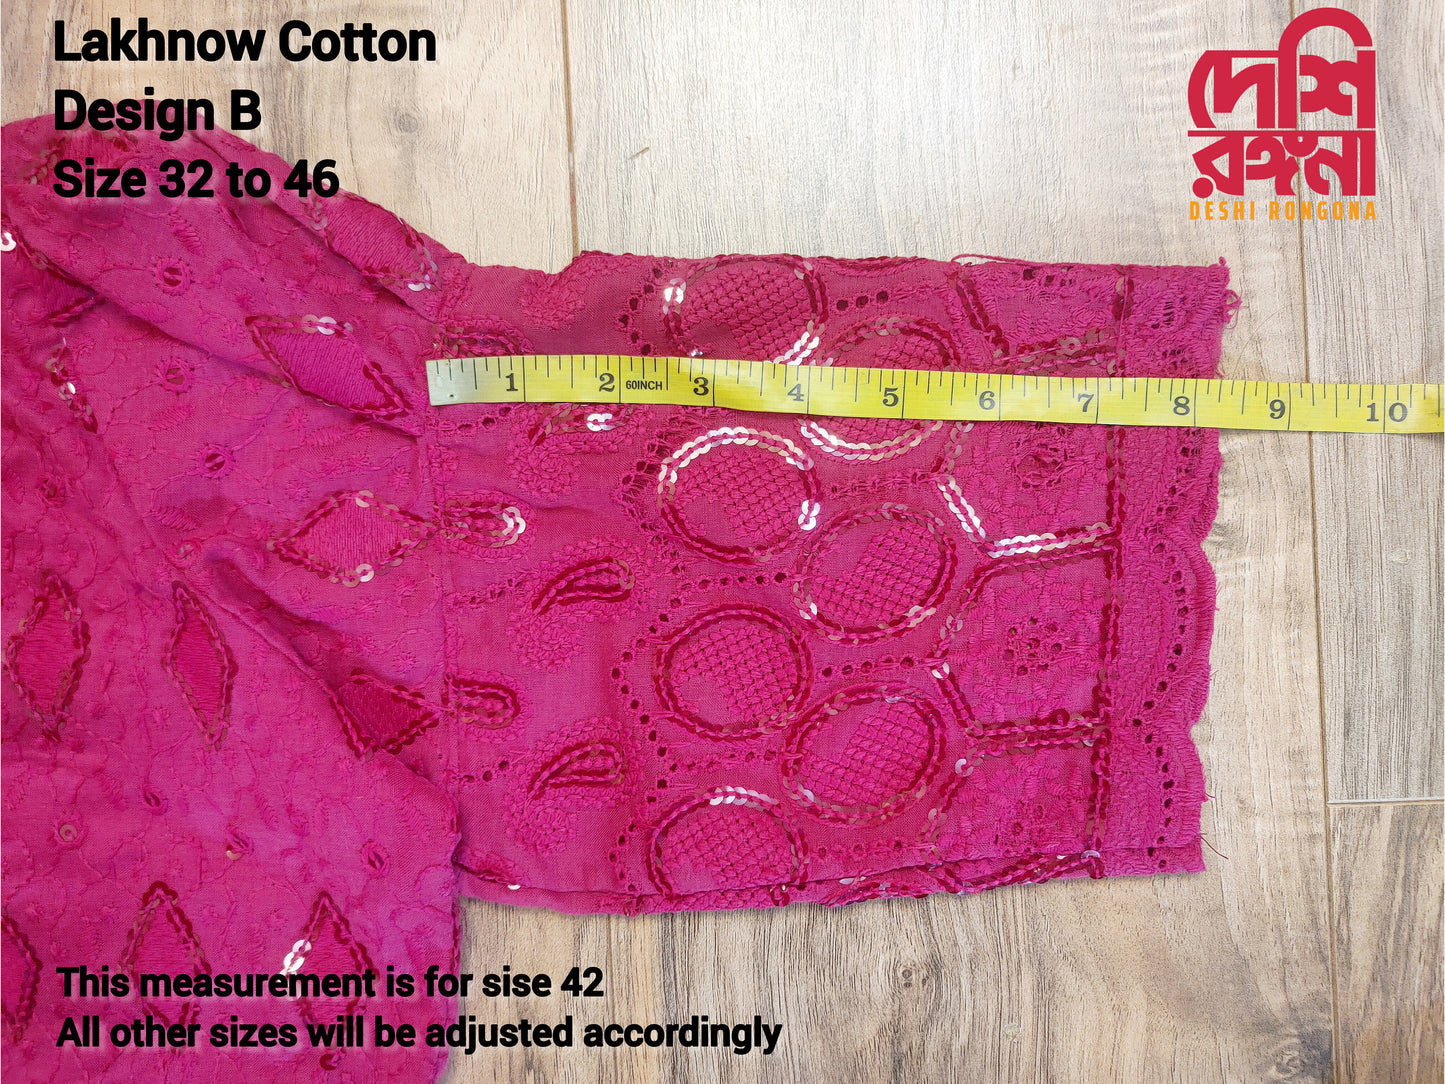 Readymade Lakhnaw Cotton Blouse, Magenta Readymade Designer Blouse, Embroidered, Comfortable, goes with any contrast saree of your closet